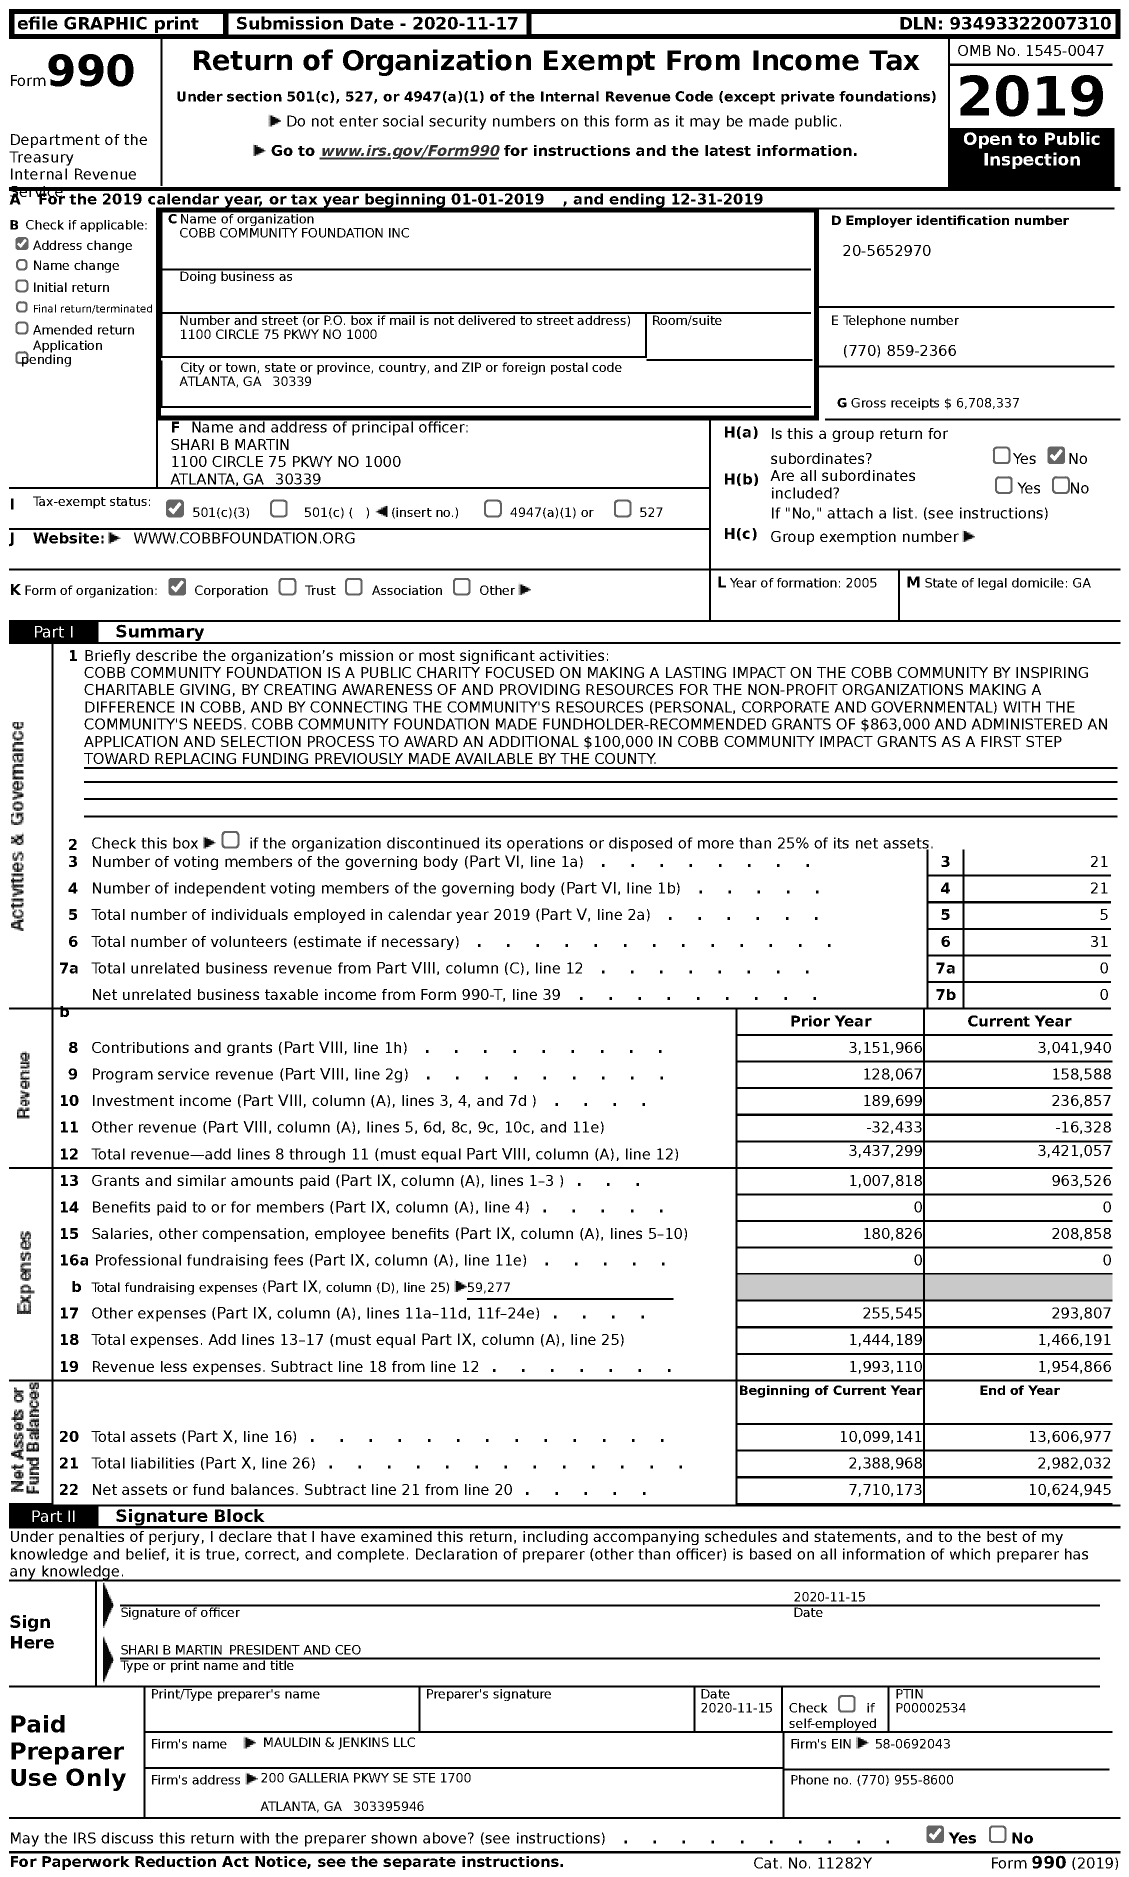 Image of first page of 2019 Form 990 for Cobb Community Foundation (CCF)